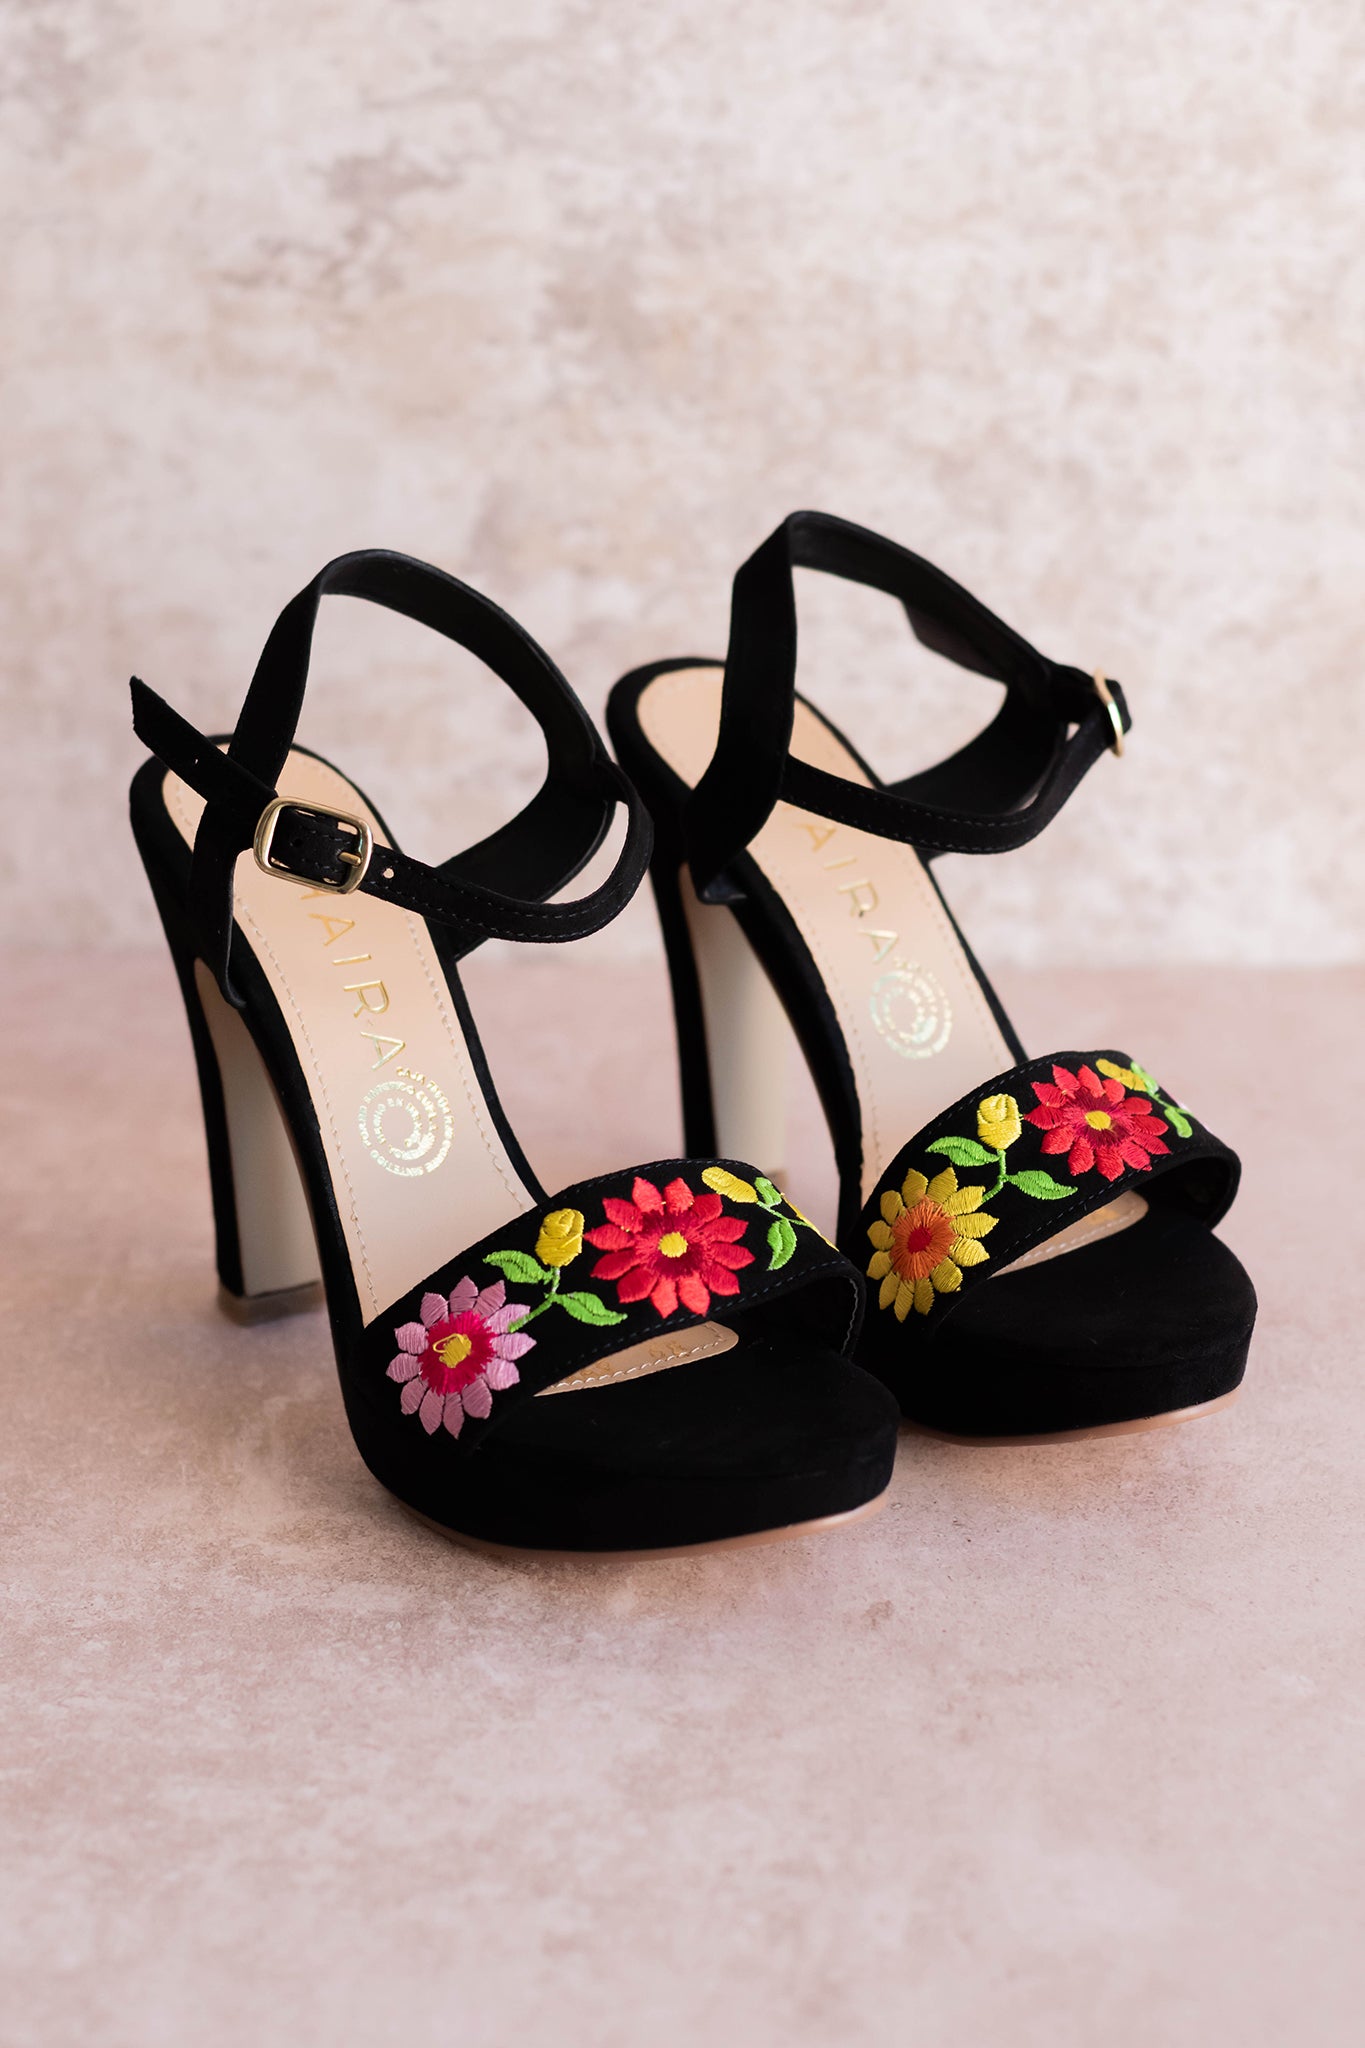 FloralBreeze - Heels with Embroidered Floral Design and Thin High Heel, 5727-Y